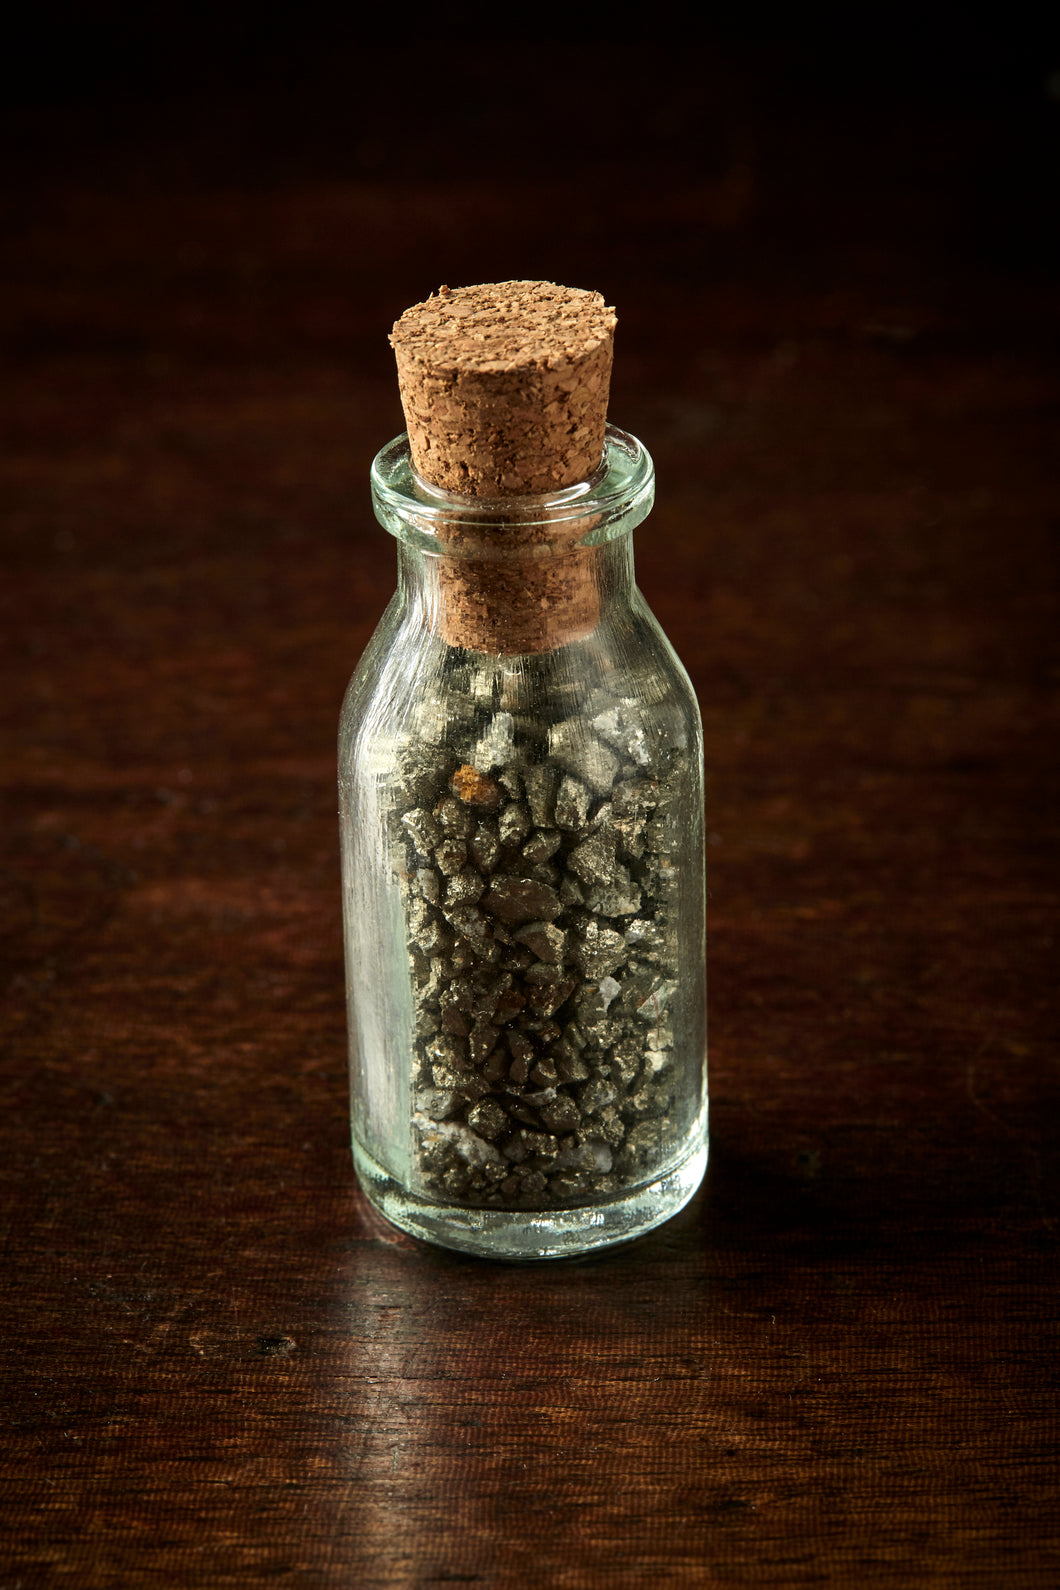 Mini glass bottle with cork containing Leprechaun Gold, otherwise known as iron pyrite or fool's gold pieces